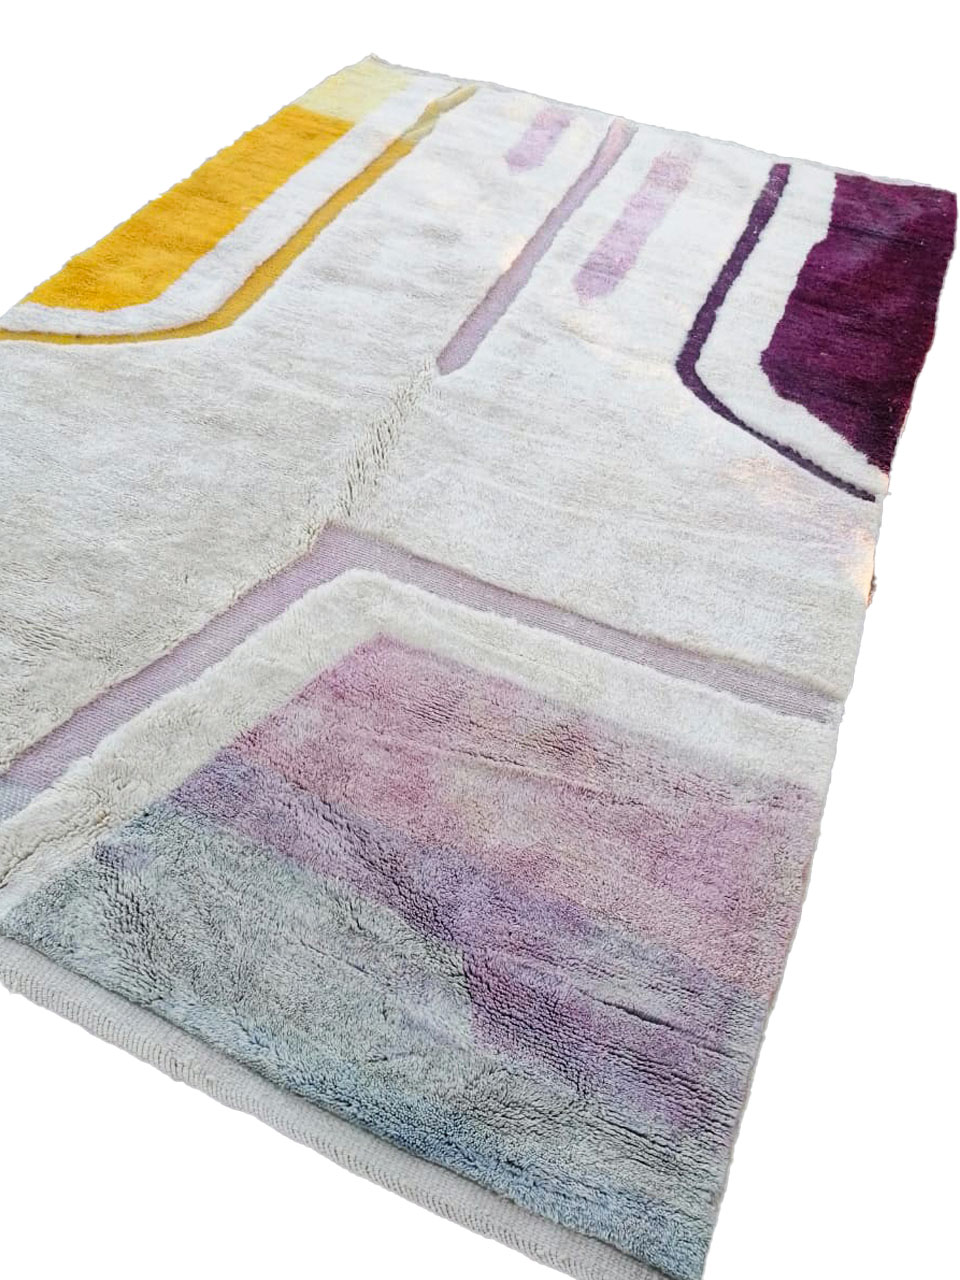 Abstract moroccan rug purple and yellow 7x10